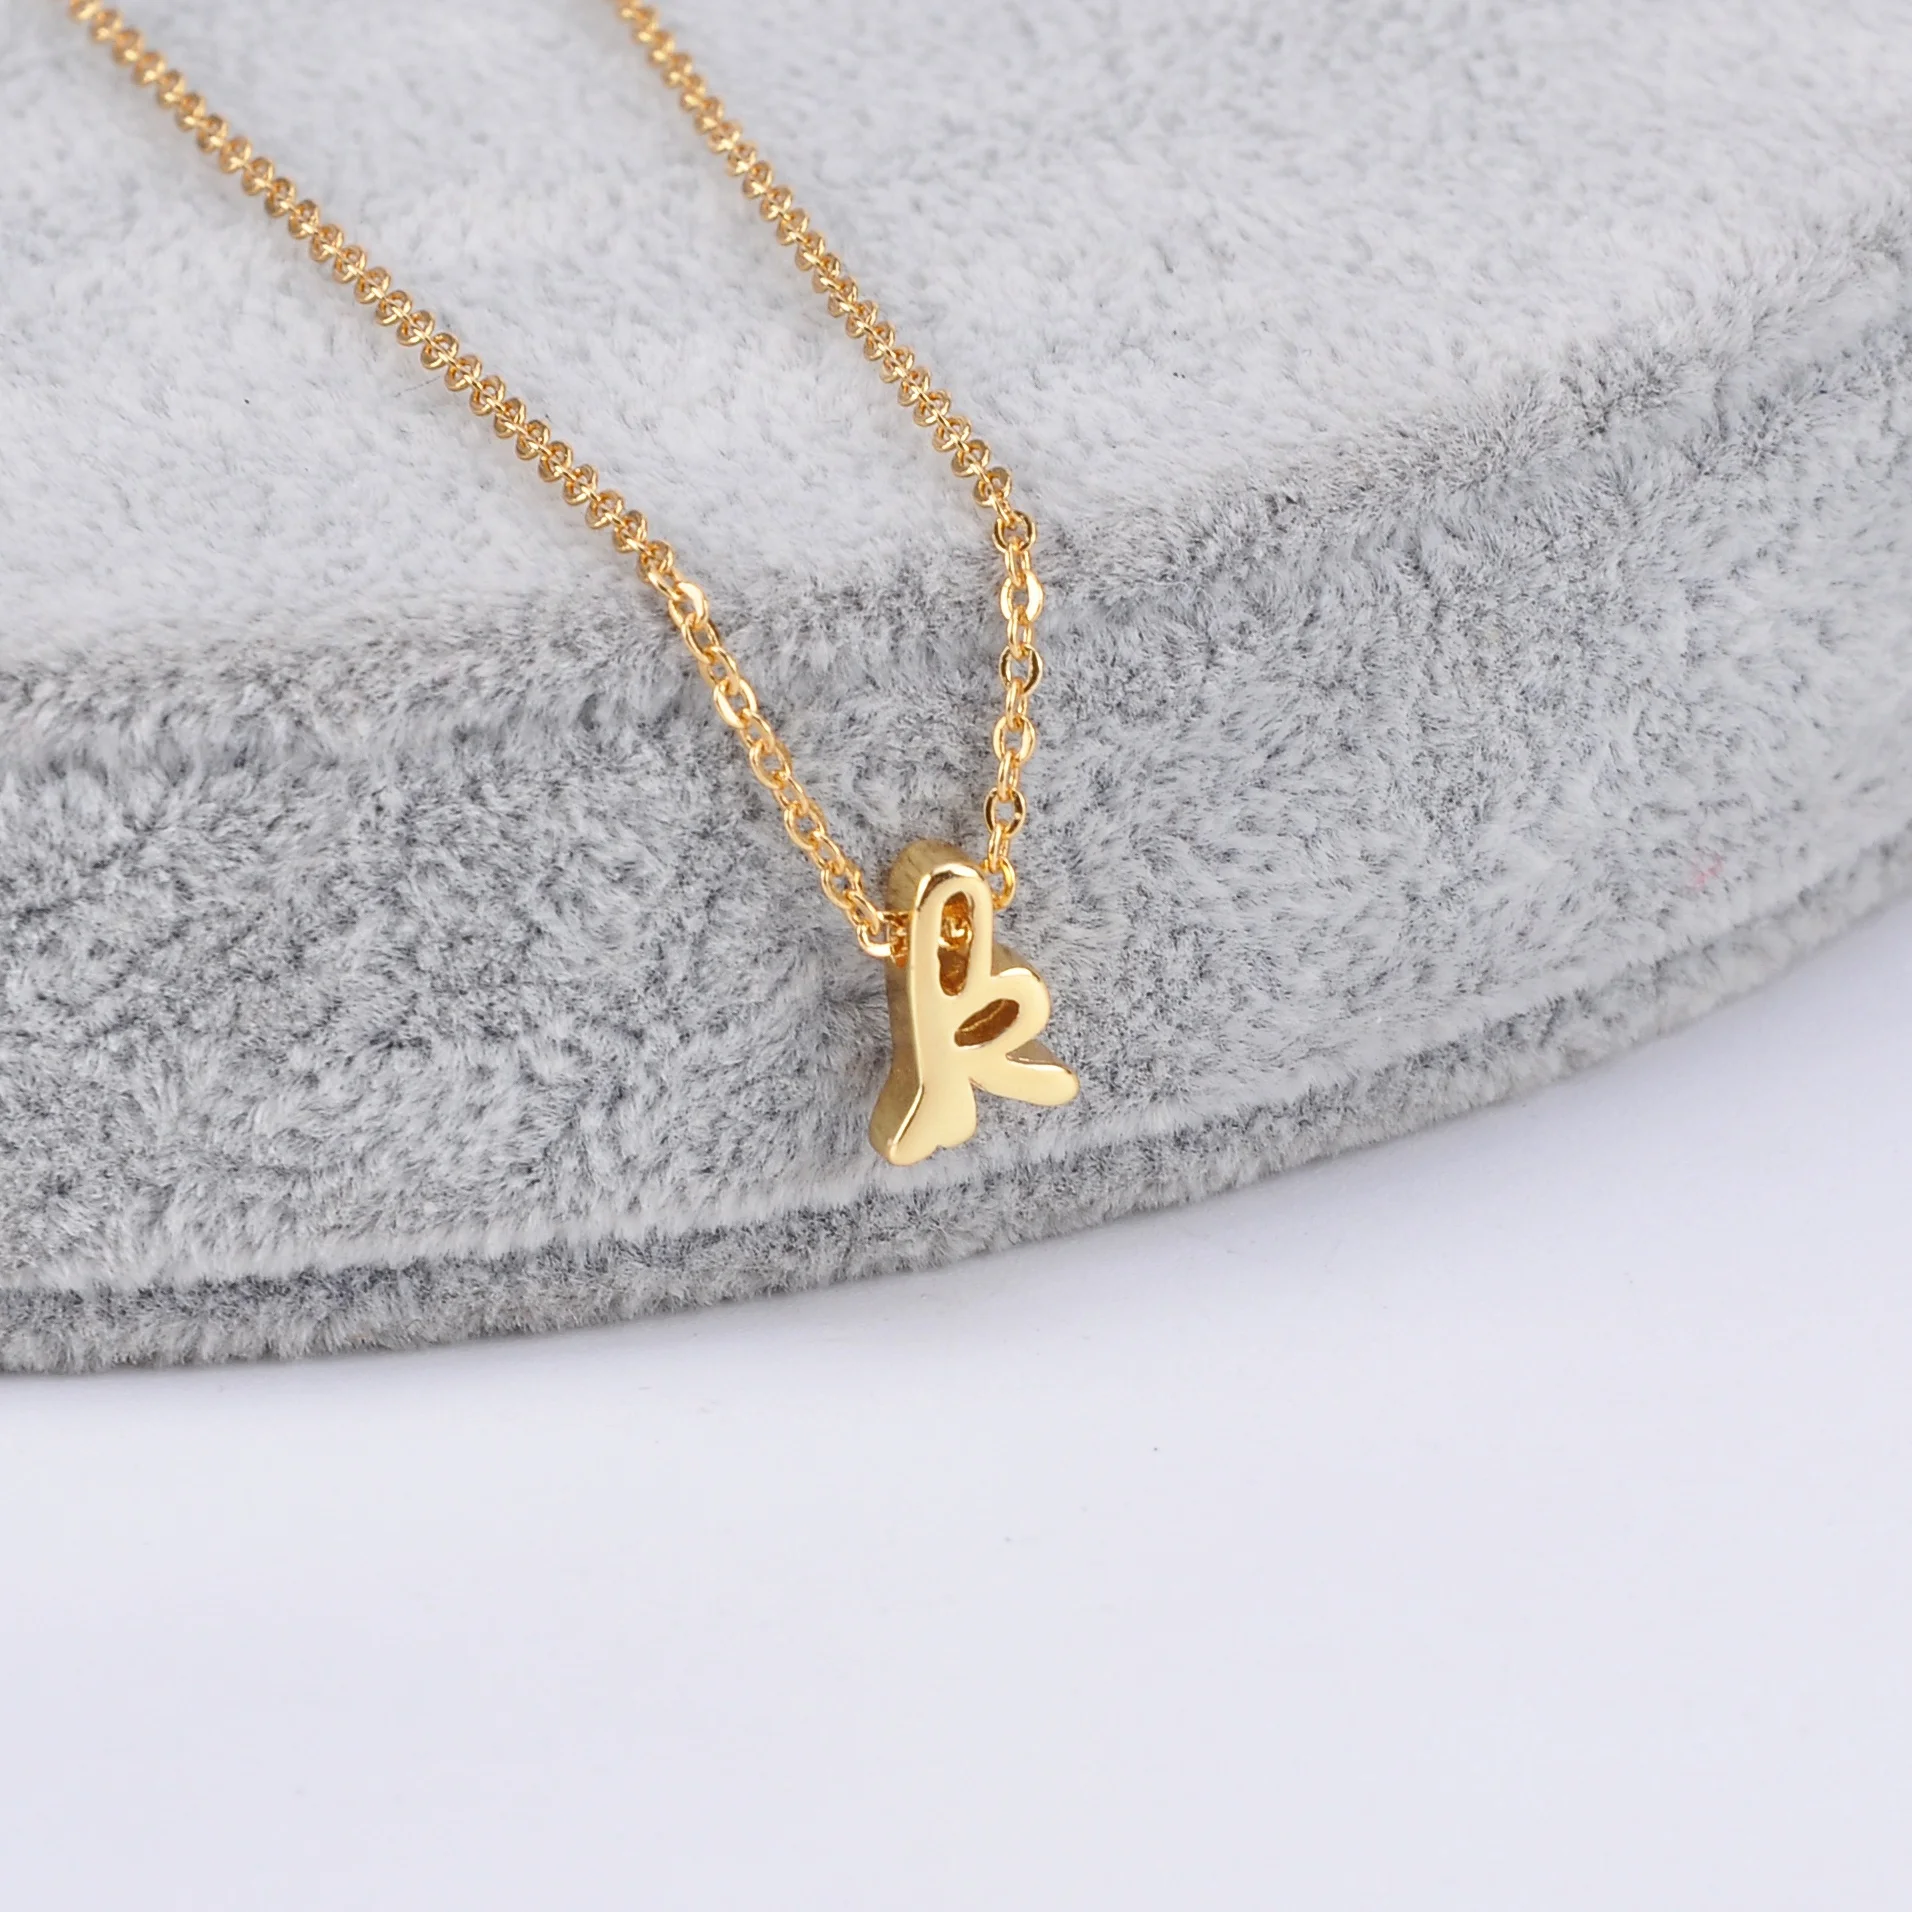 

Personalized Minimalist Tiny Dainty 26 Cursive Initial Letter With Heart Charm Pendant Necklace, Sliver/gold/rose gold